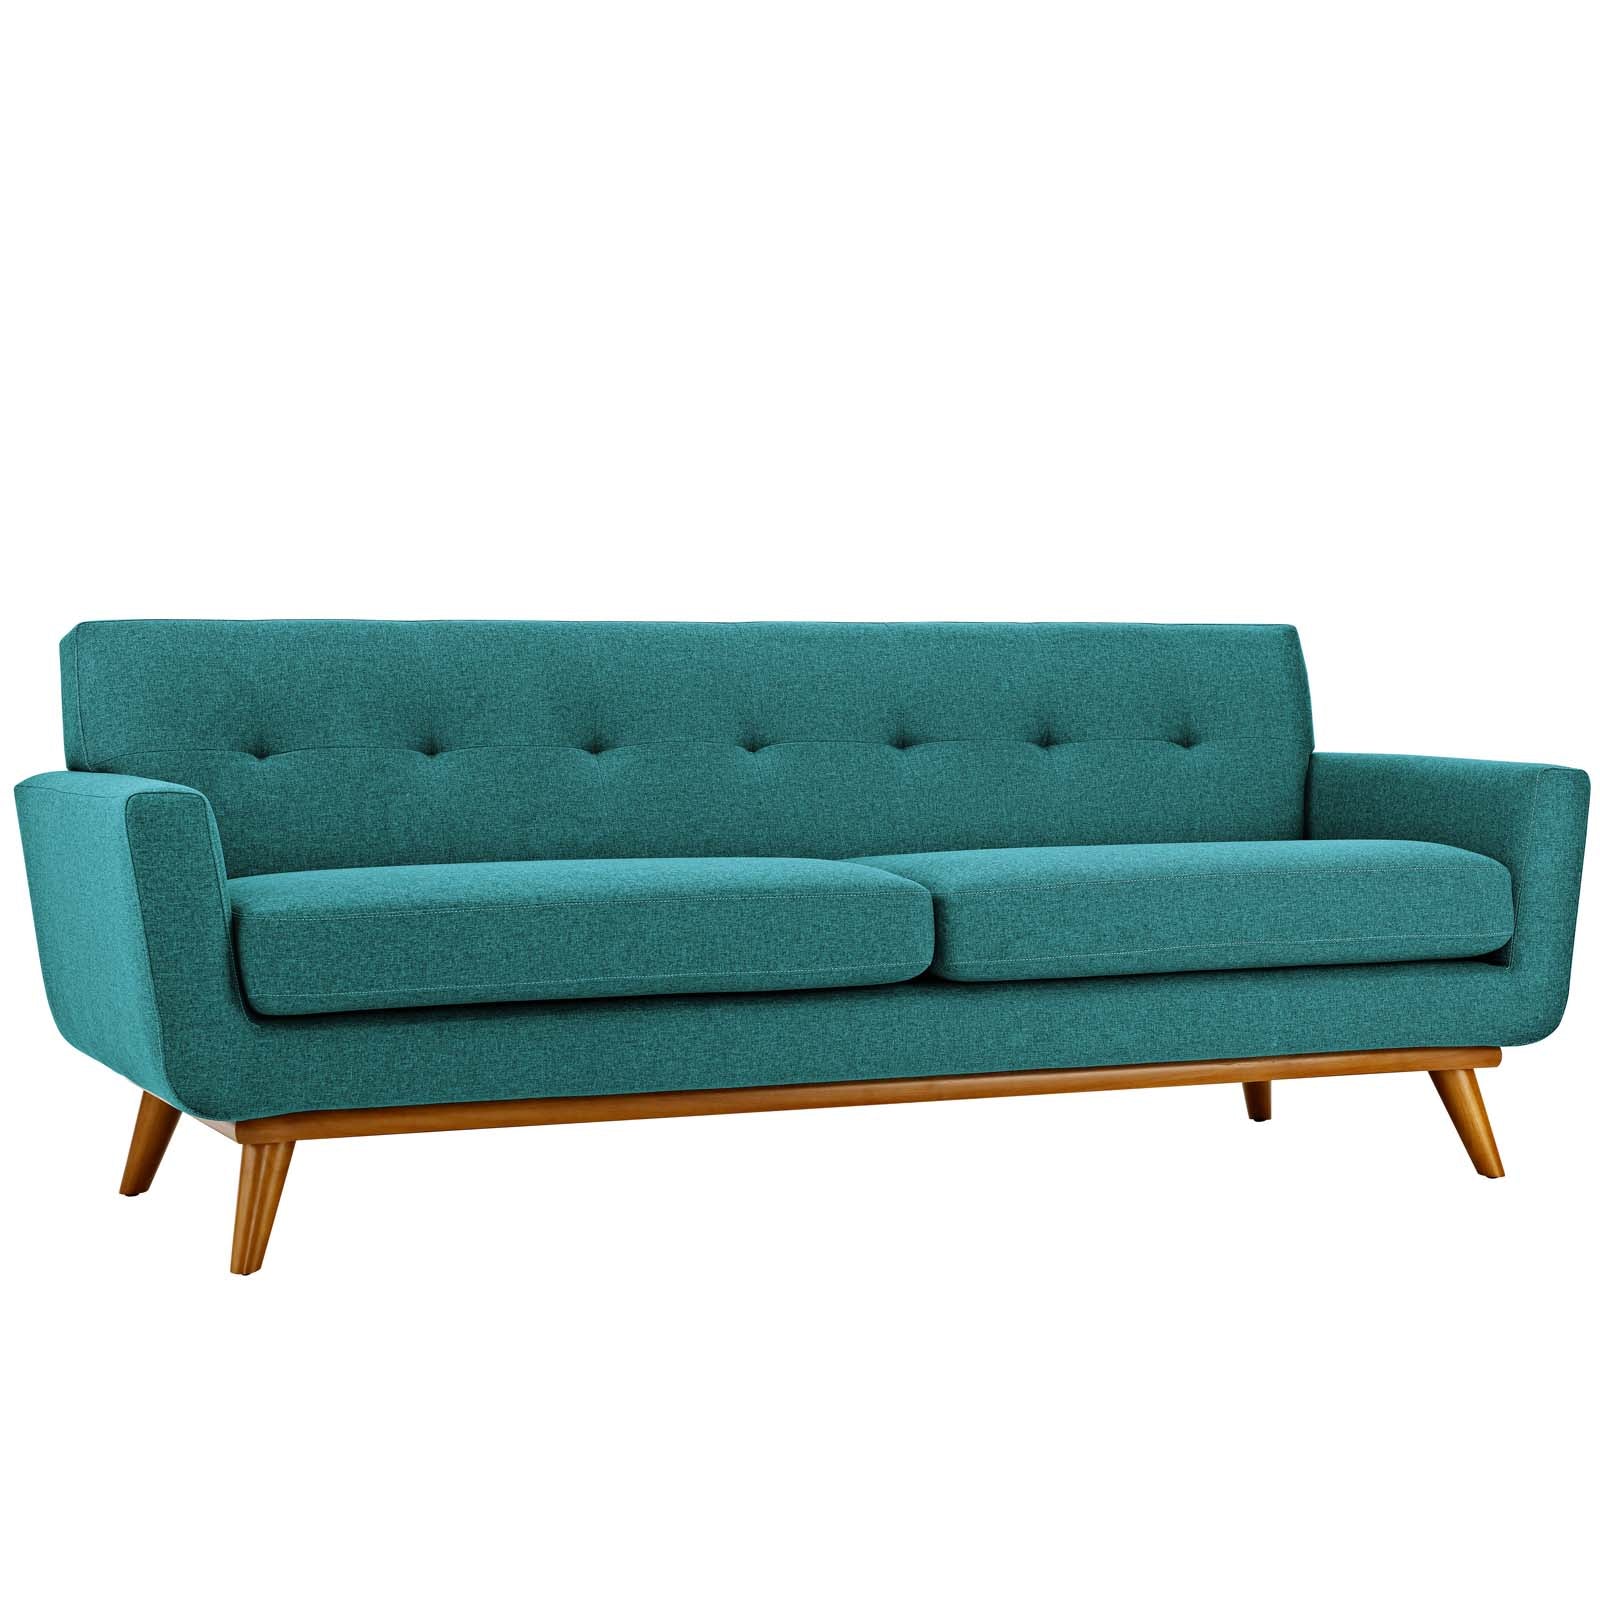 Modway Sofas & Couches - Engage Armchairs and Sofa (Set of 3) Teal